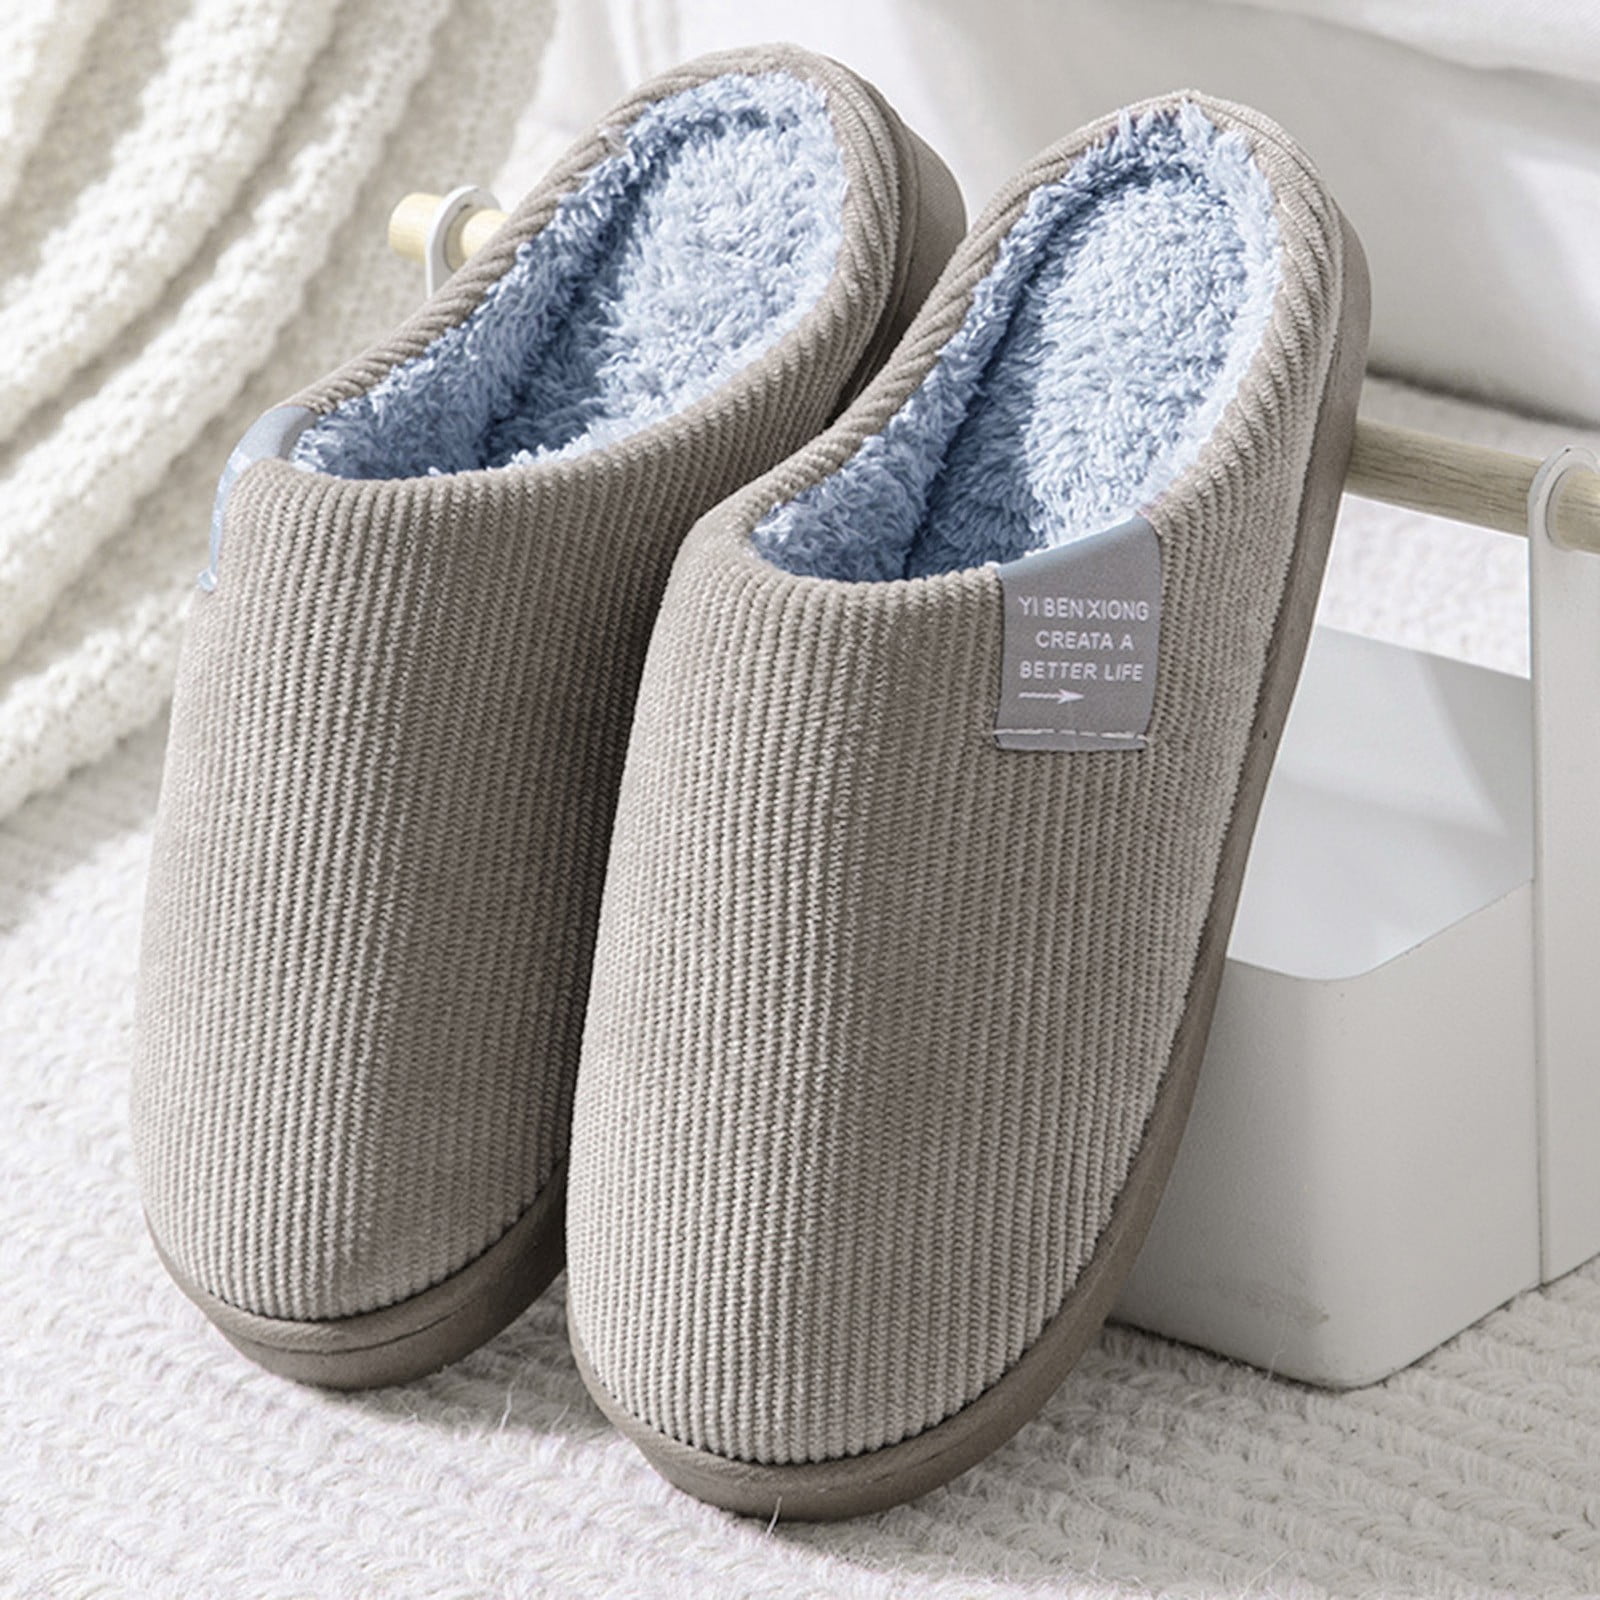 Microwavable heated slippers are the best winter footwear and we need them  | Kidspot